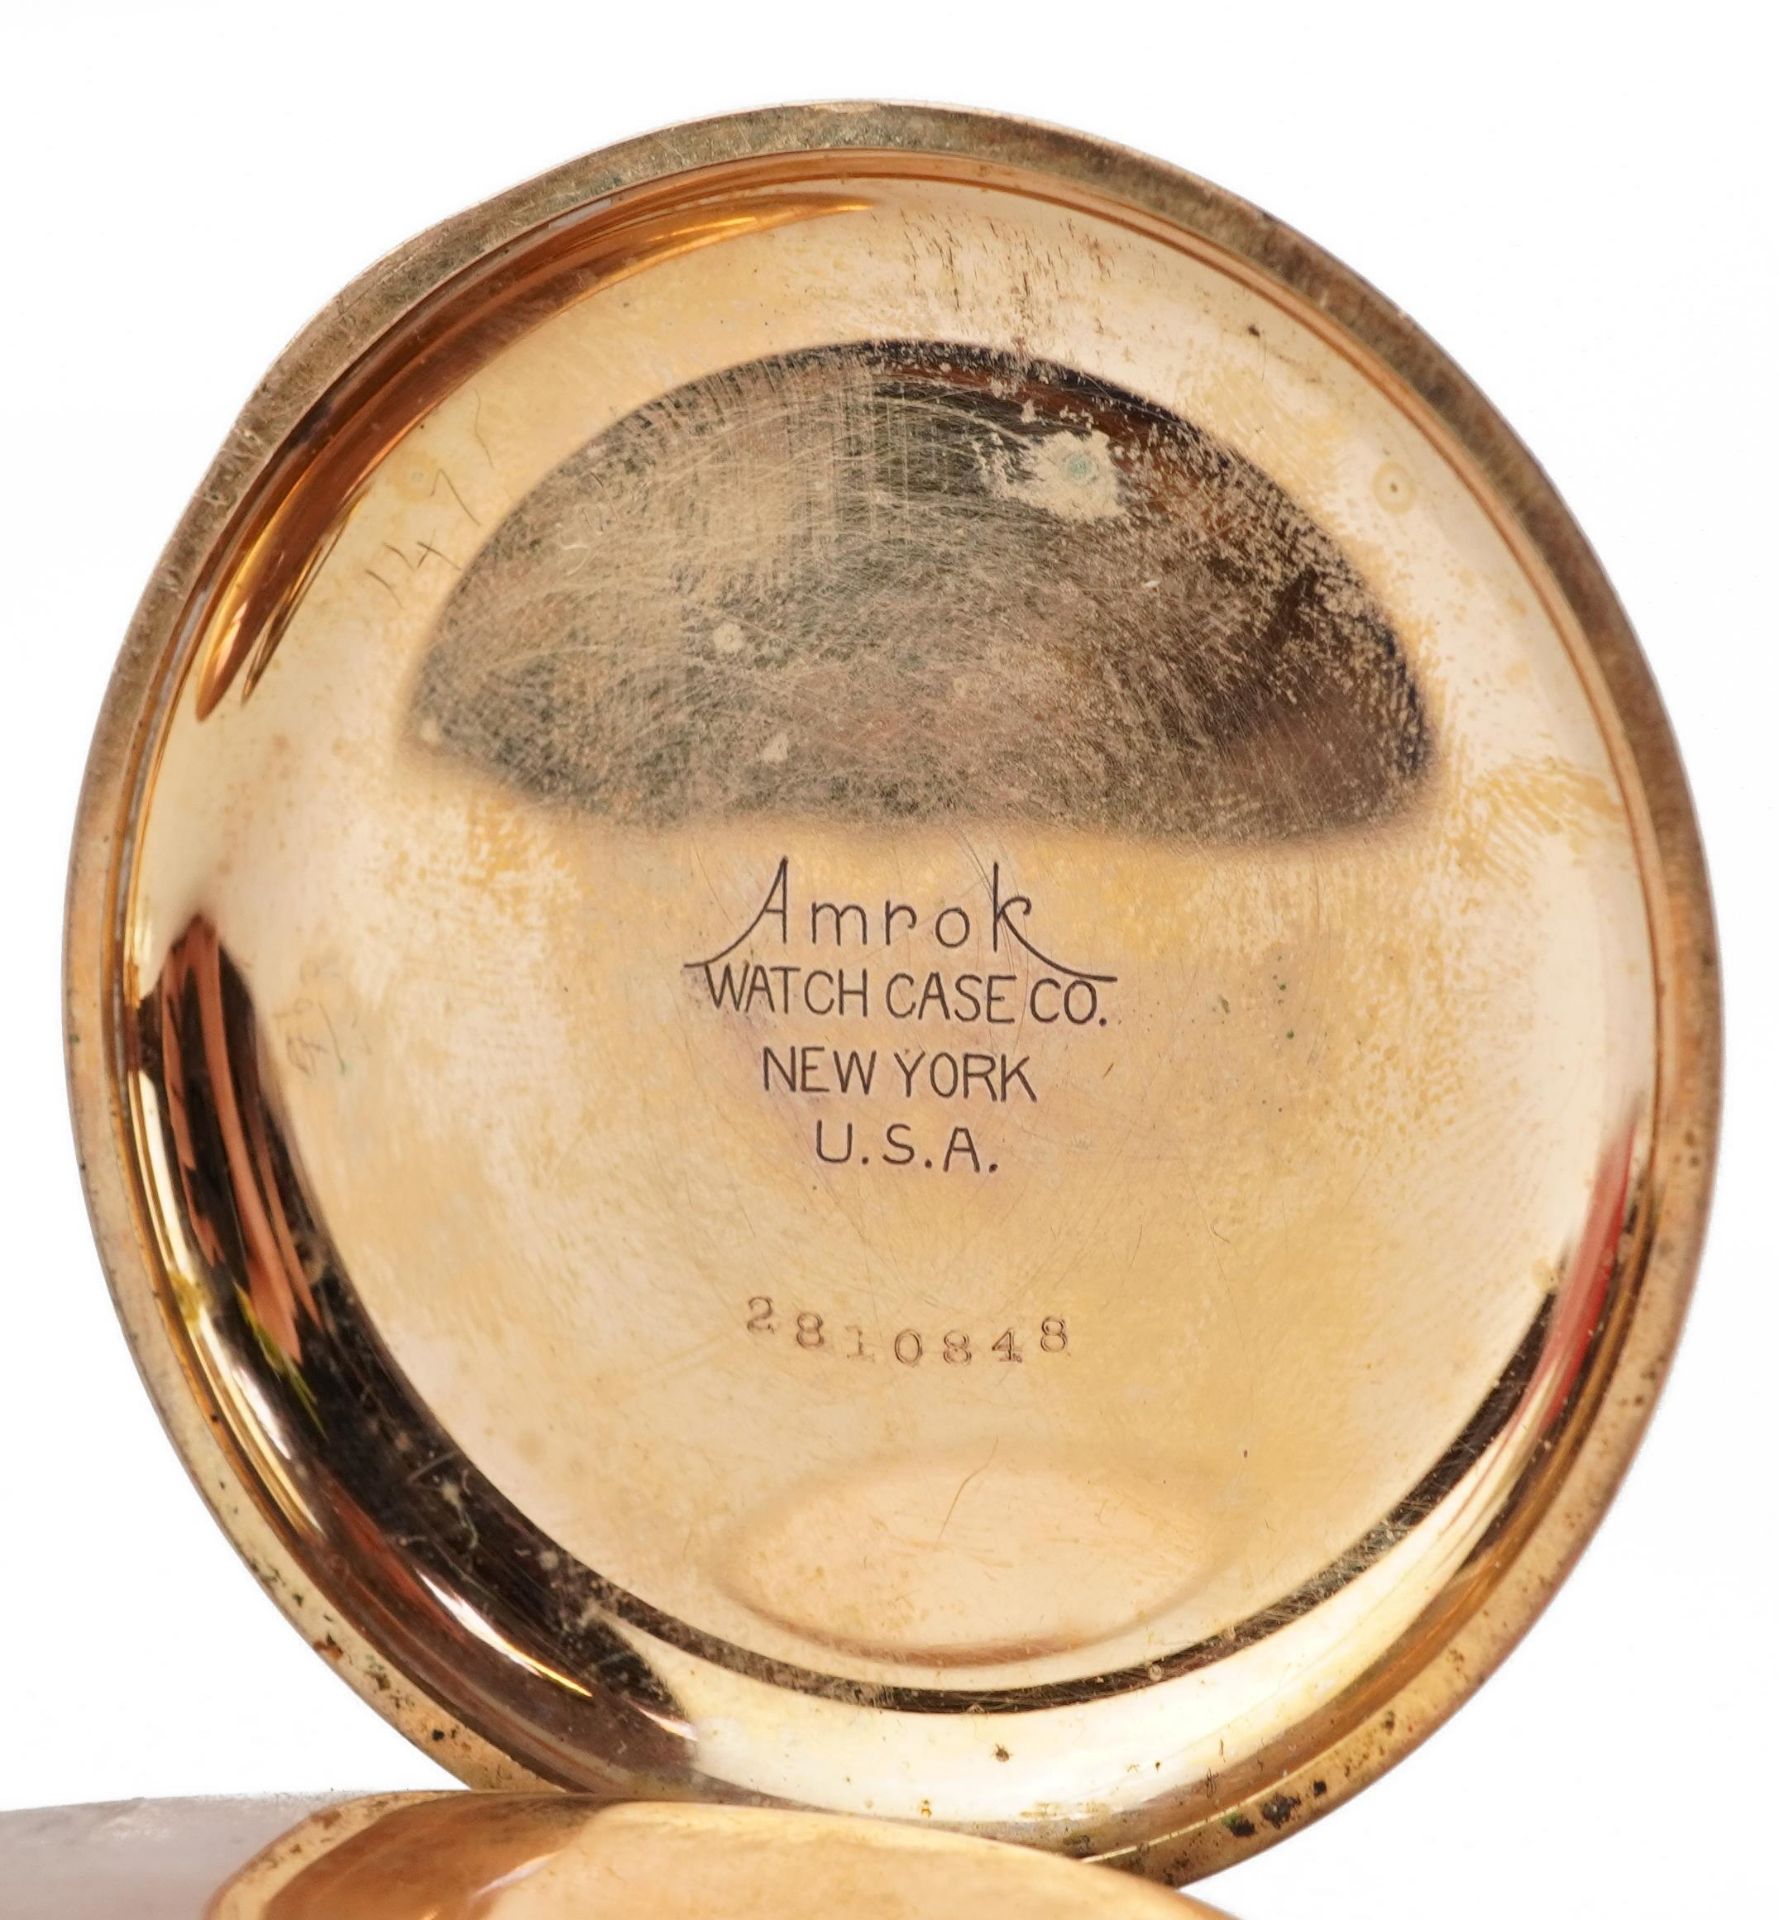 Gentlemen's military interest trench watch with enamelled dial and yellow metal American Amrok - Image 5 of 5